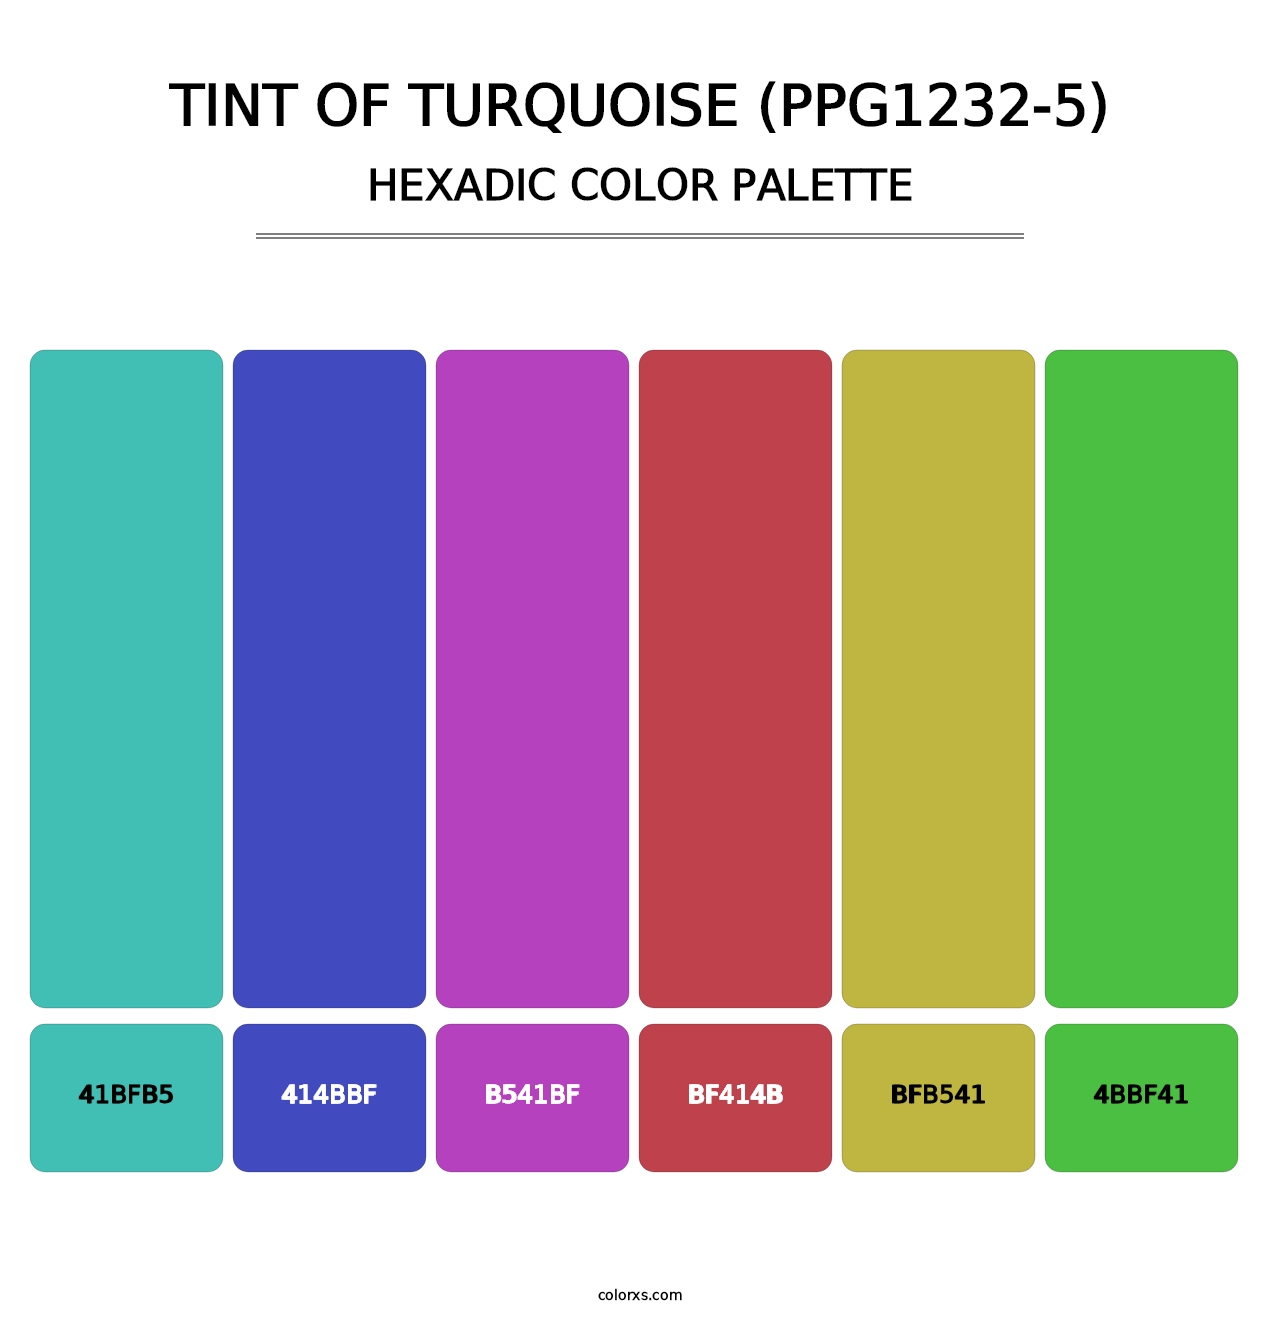 Tint Of Turquoise (PPG1232-5) - Hexadic Color Palette